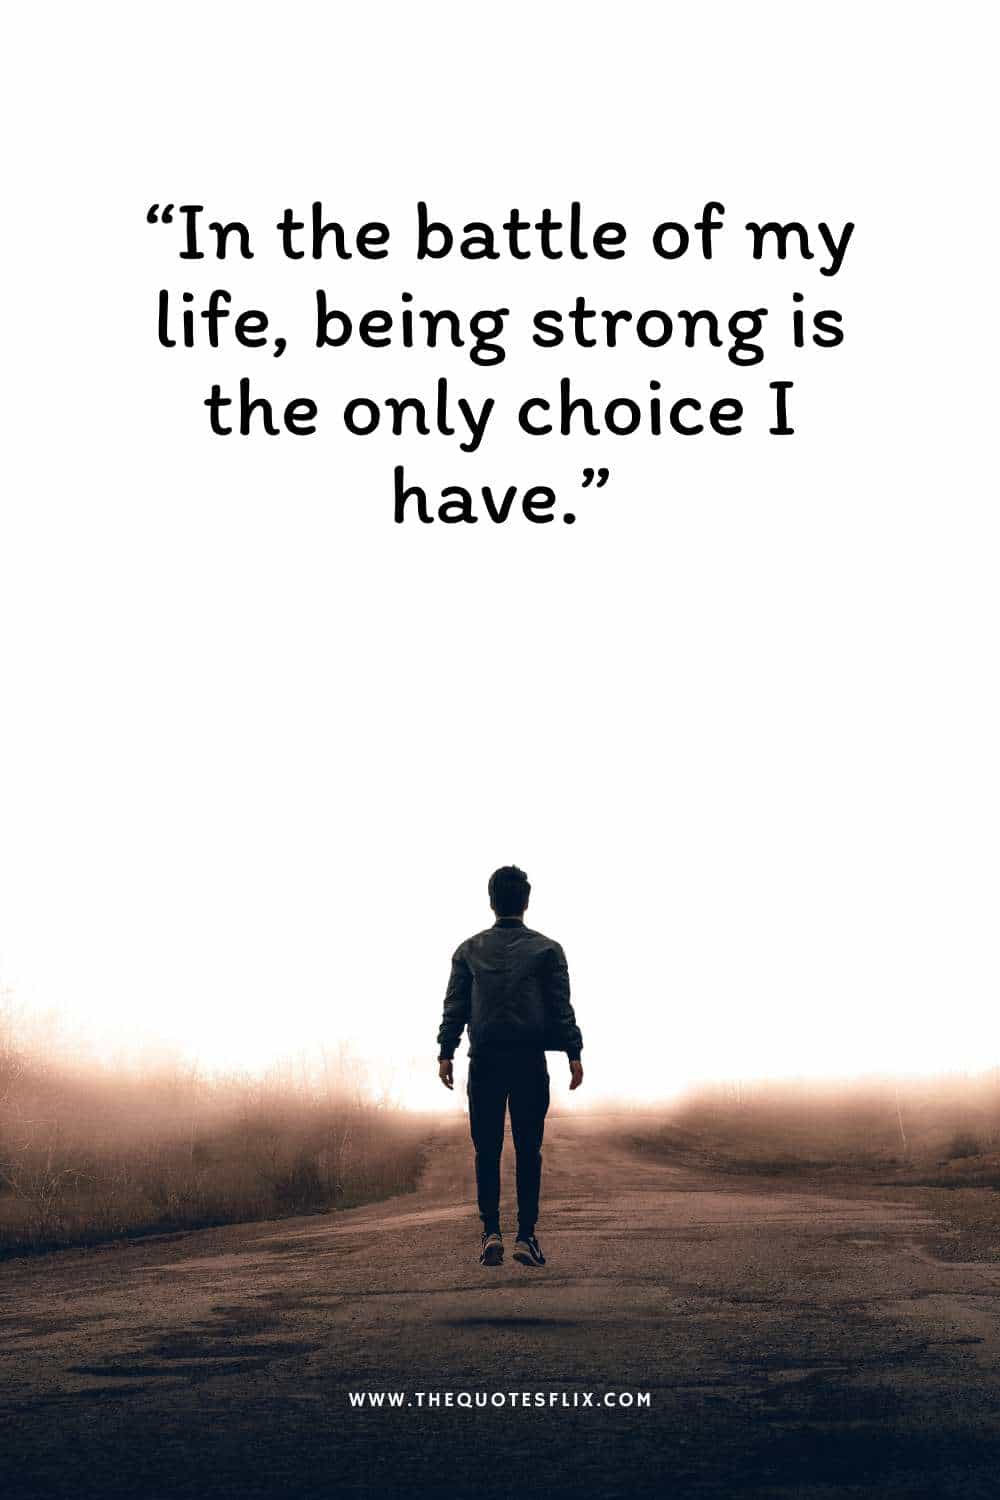 inspirational cervical cancer quotes - battle of my life being strong is only choice i have